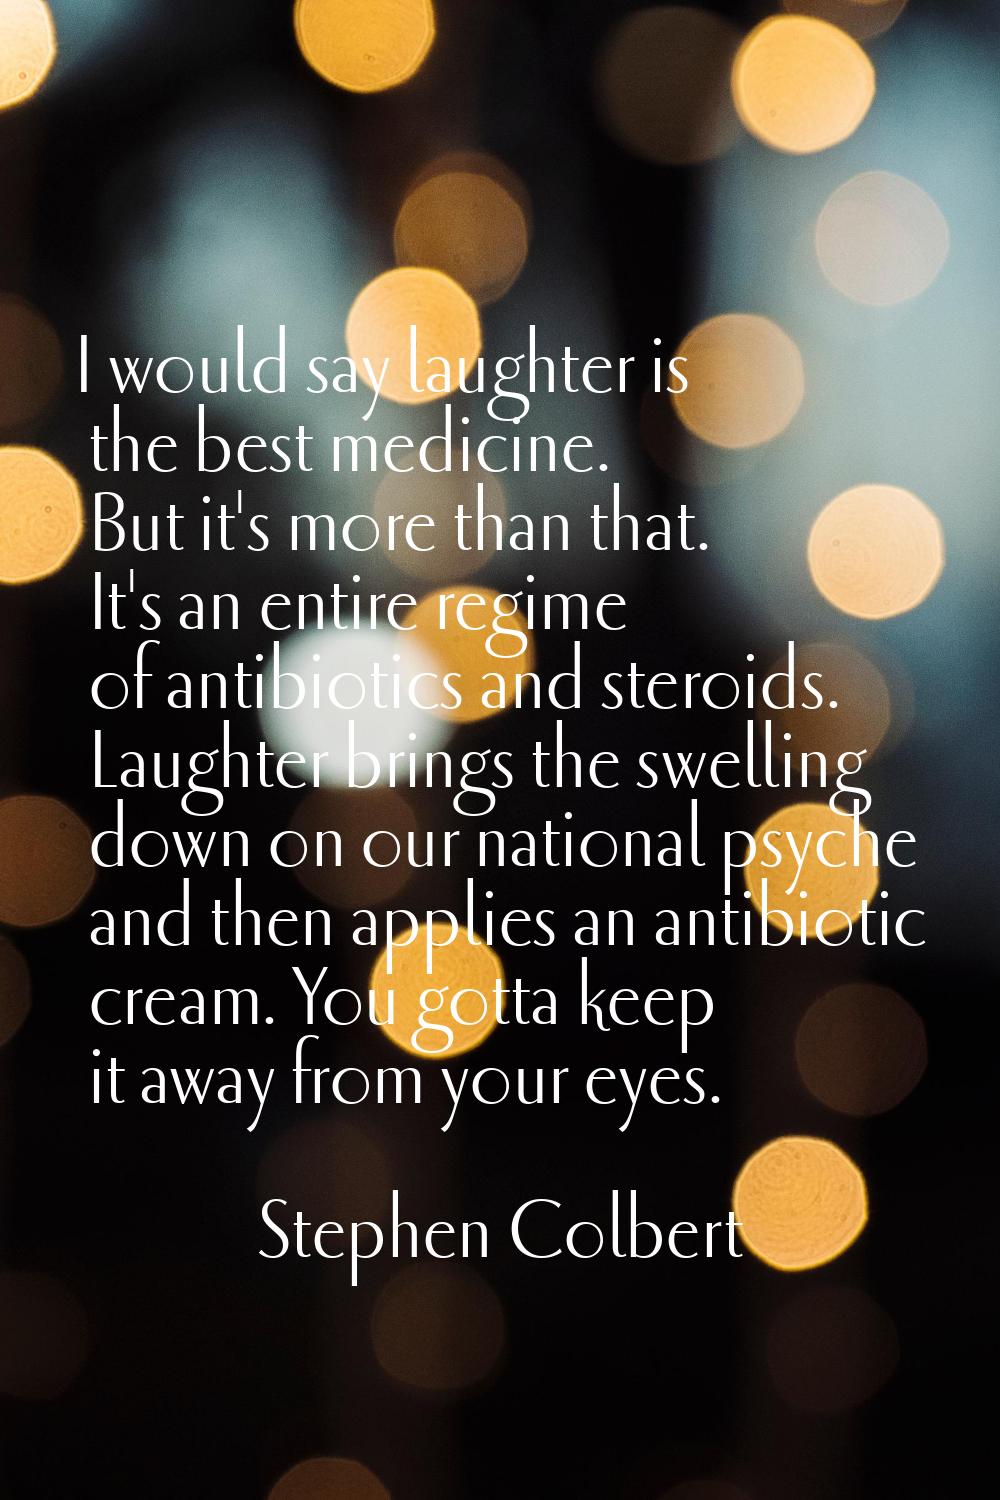 I would say laughter is the best medicine. But it's more than that. It's an entire regime of antibi